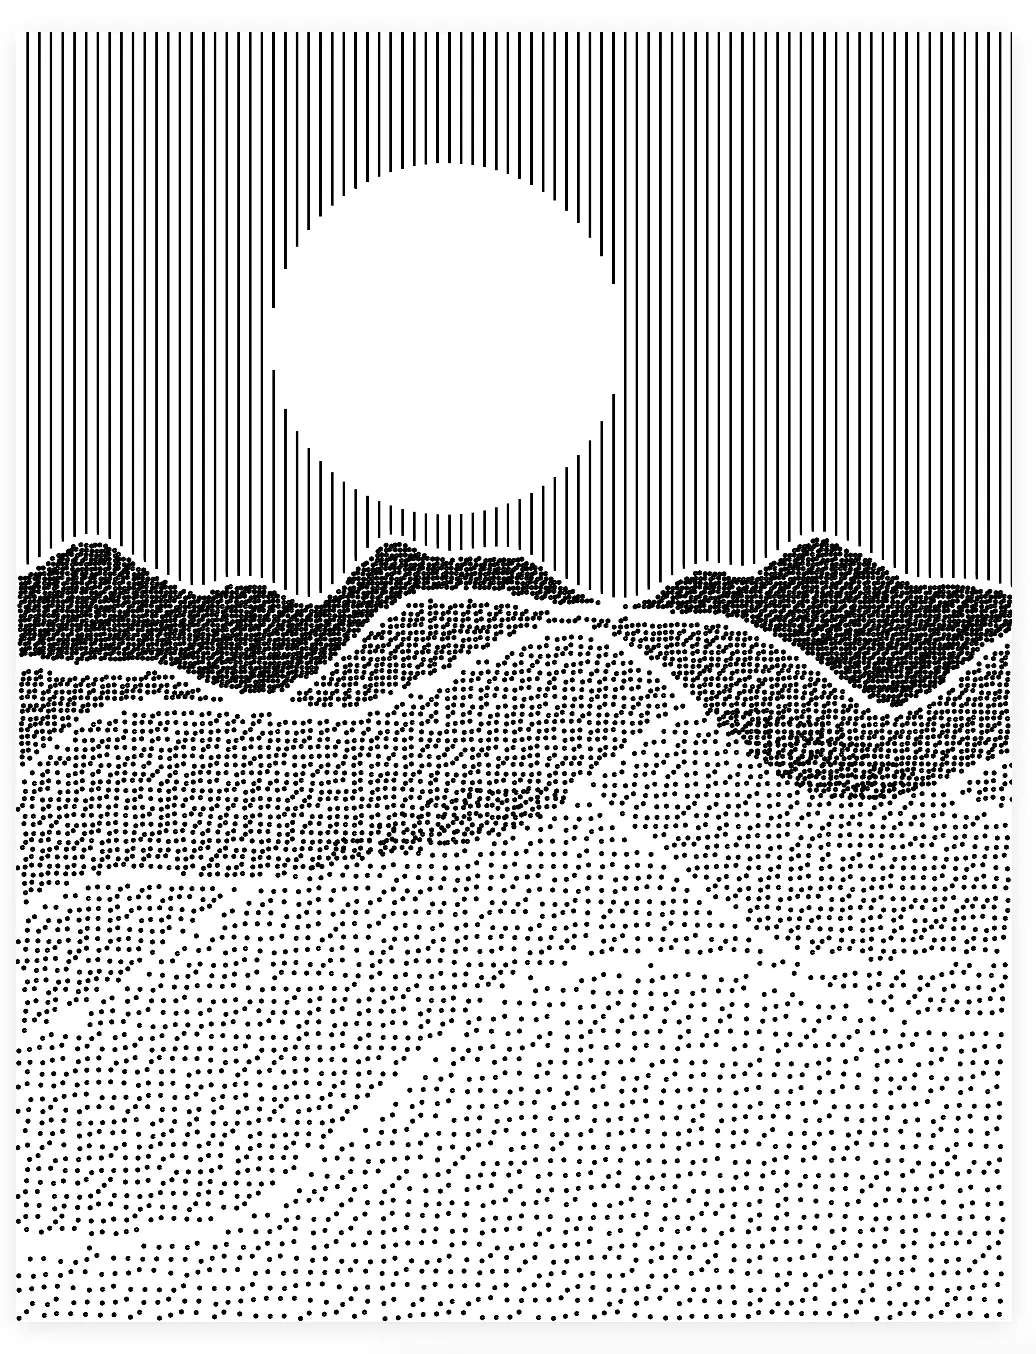 a similar landscape but each mountain range is filled by a grid of black dots of different densities.